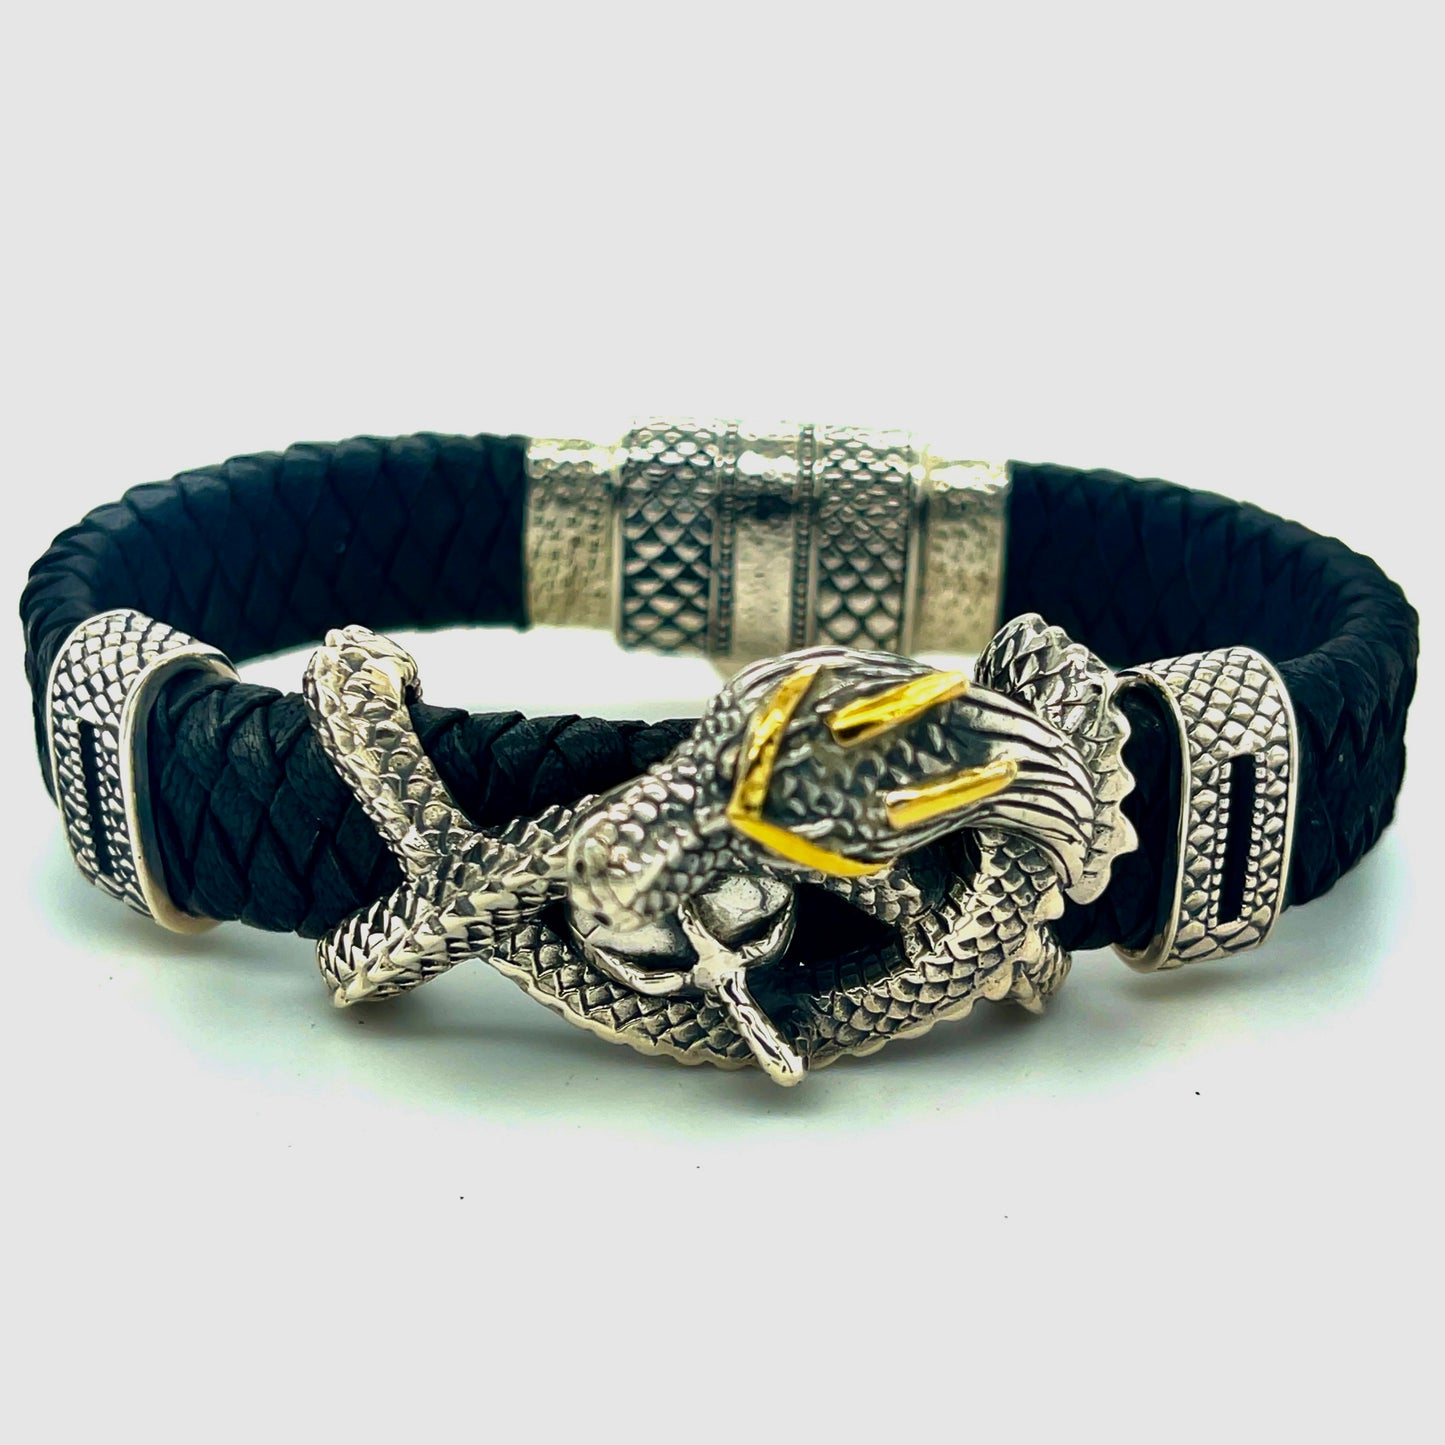 18kt Gold, Silver and Leather Dragon bracelet